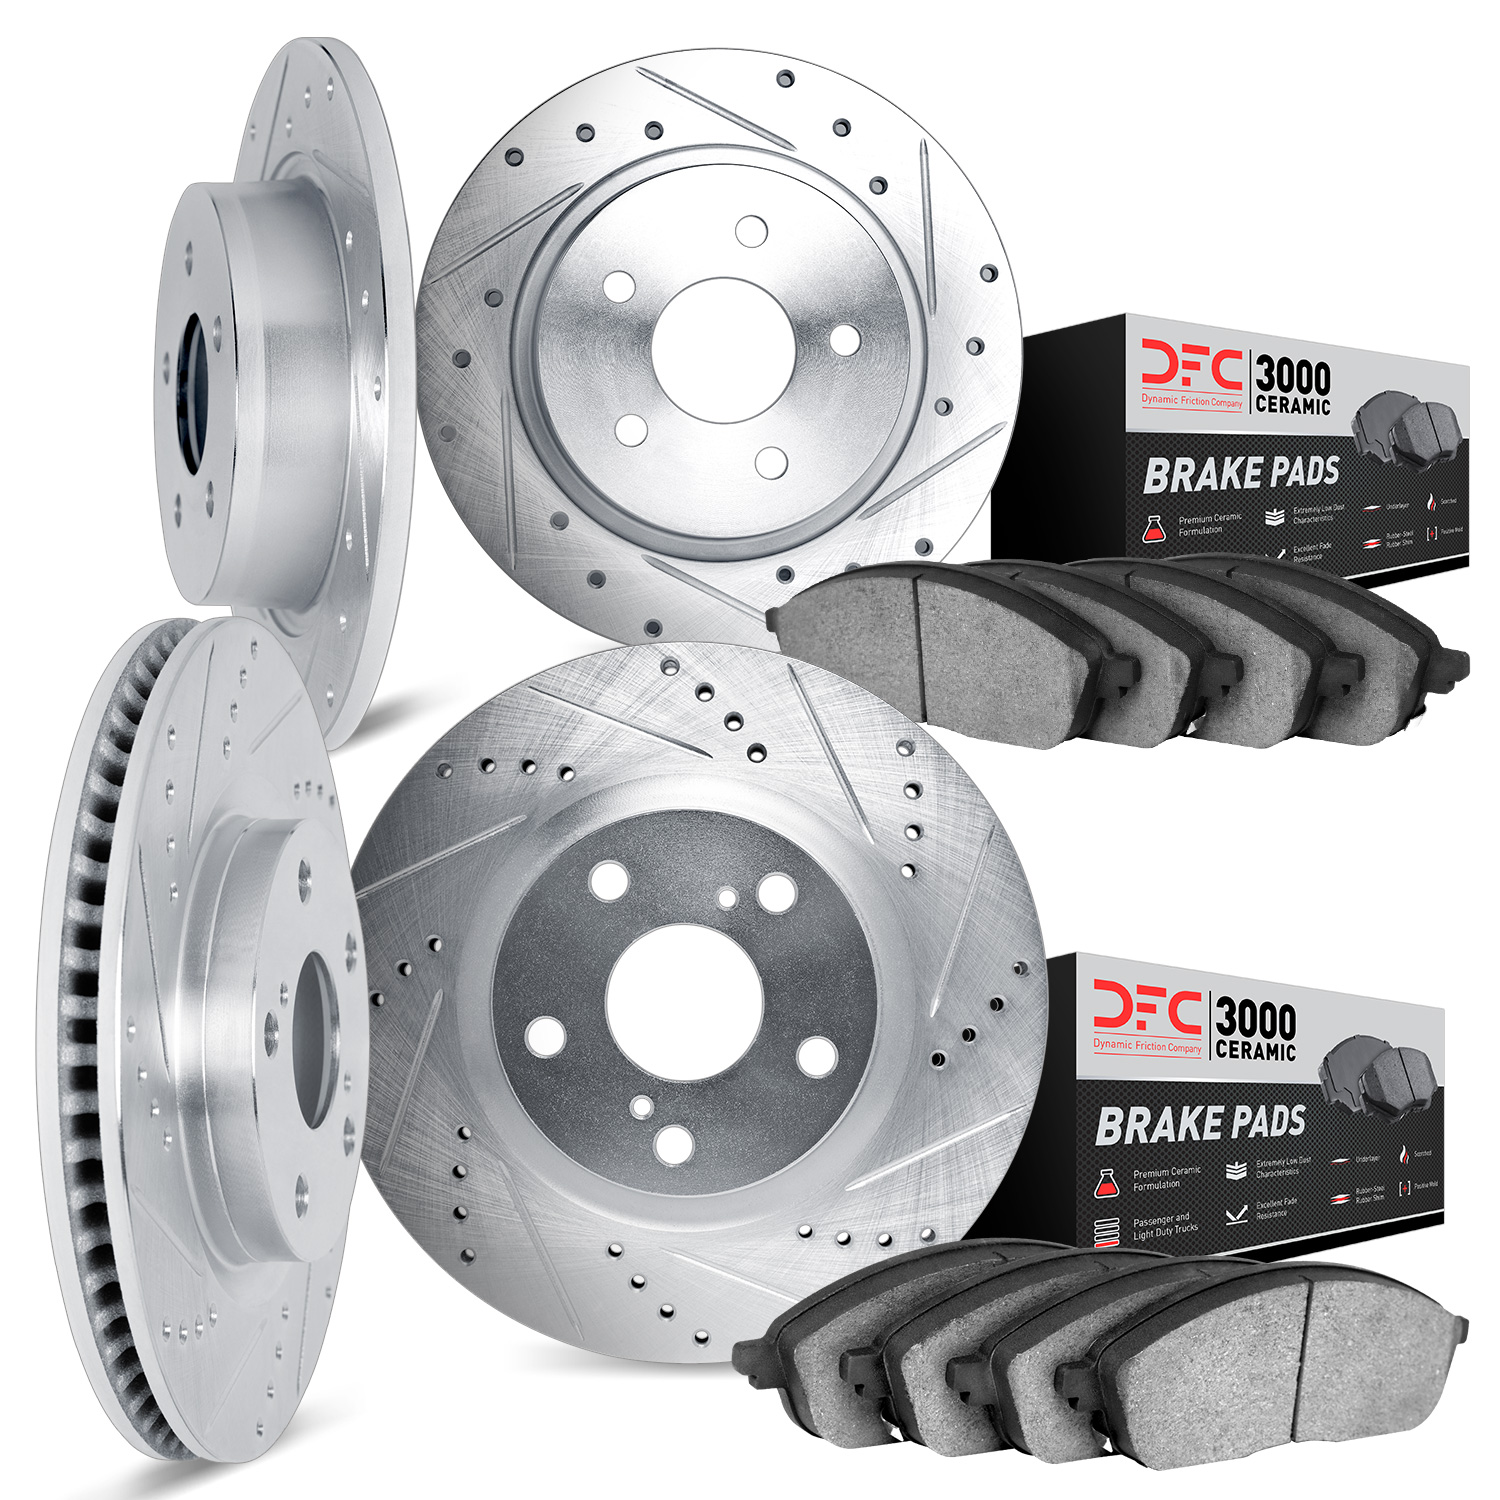 7304-80040 Drilled/Slotted Brake Rotor with 3000-Series Ceramic Brake Pads Kit [Silver], 2014-2016 Ford/Lincoln/Mercury/Mazda, P